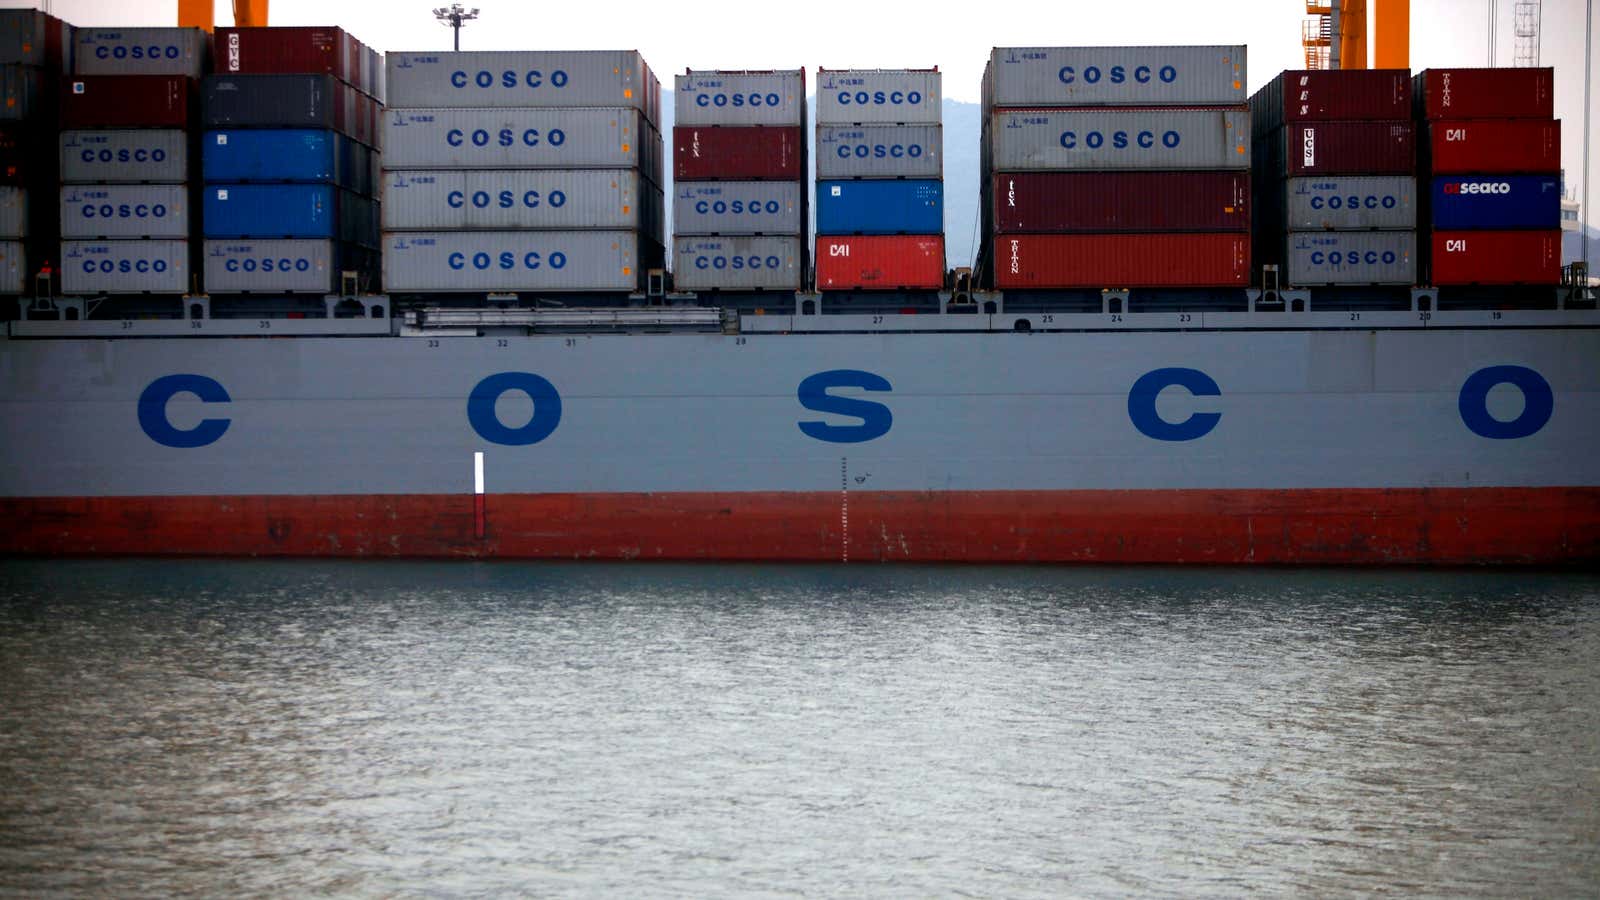 COSCO doesn’t have to worry about being sunk by foreign competition.